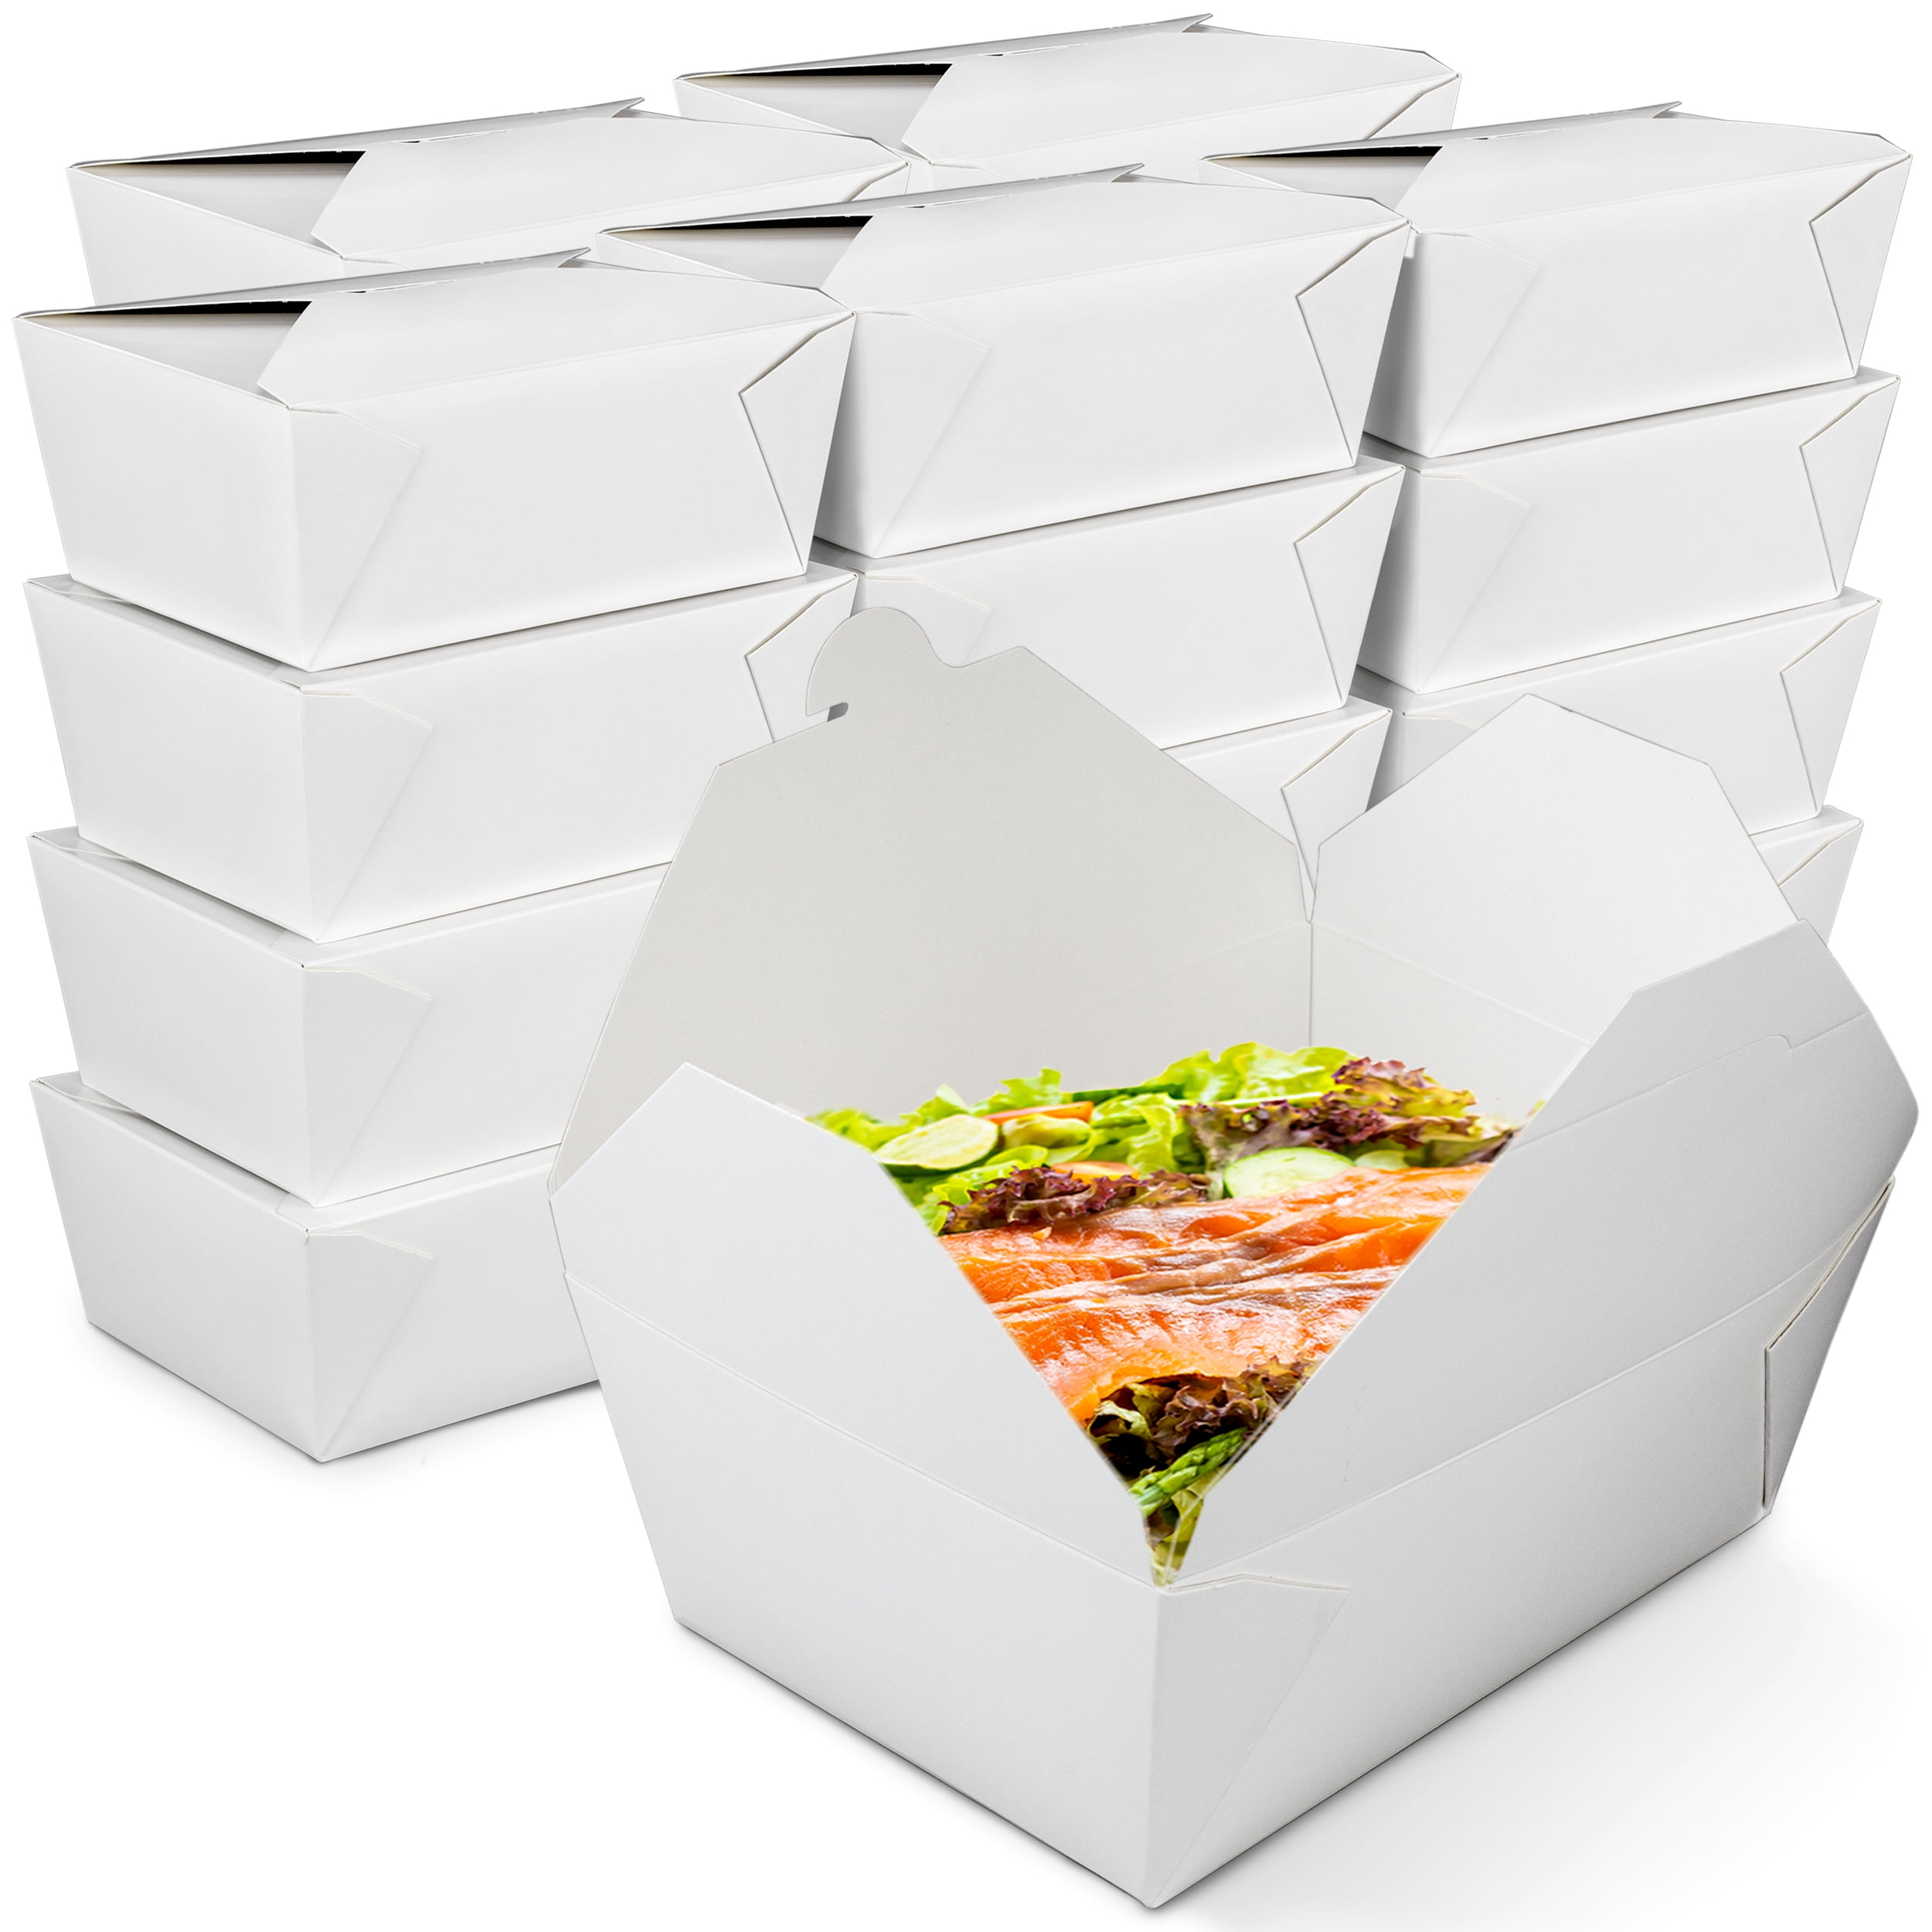 Paper Food Containers｜Small Meal Box｜Meal Box Manufacturer and